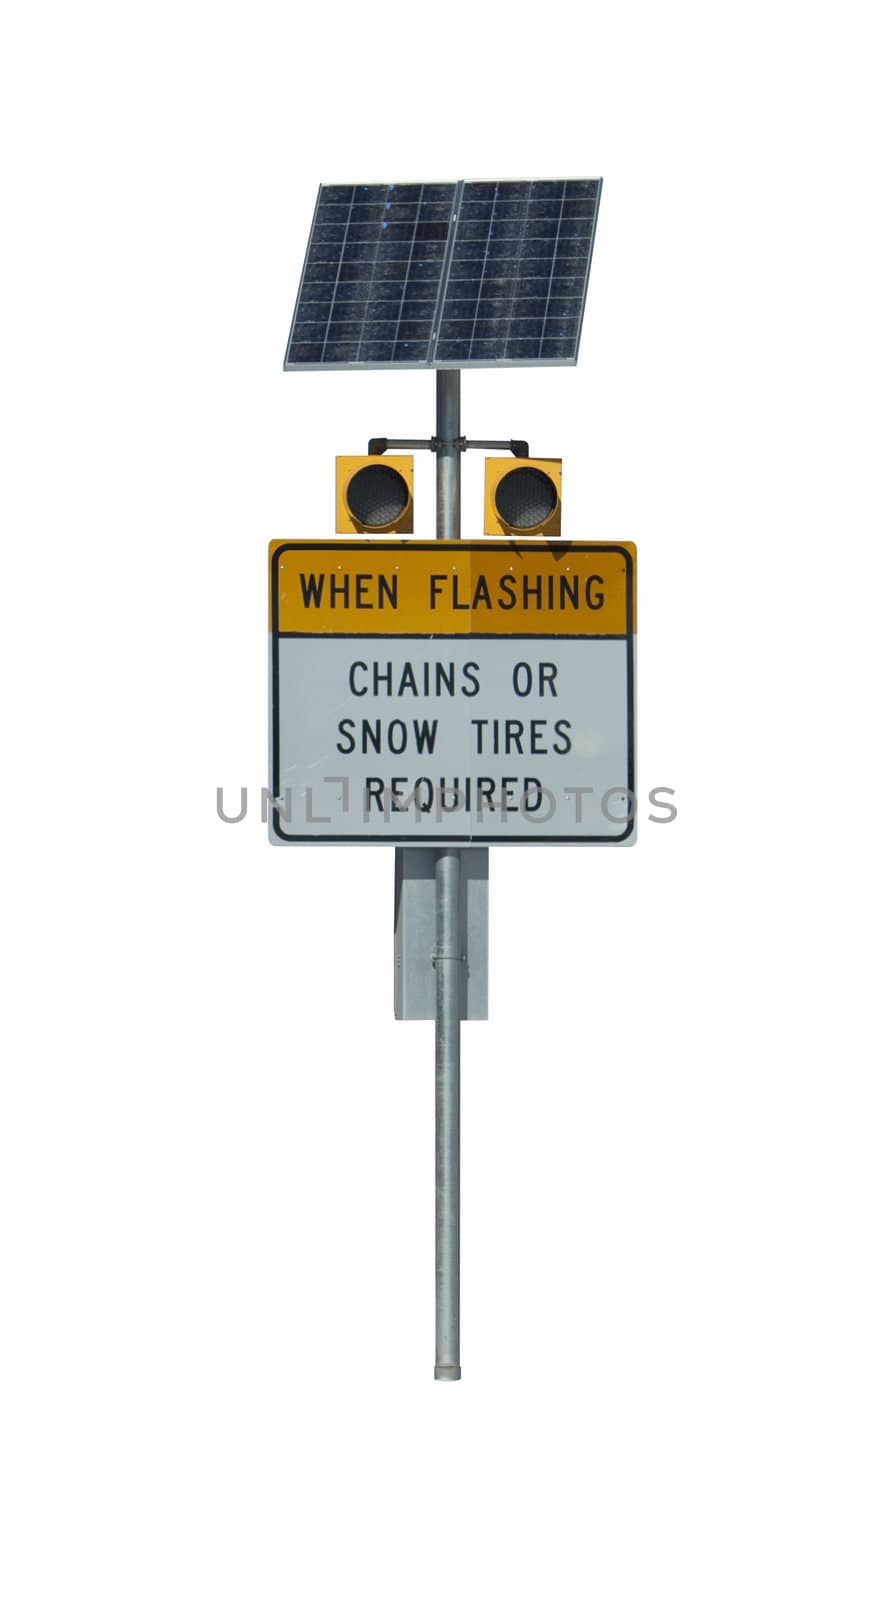 When flashing chains or snow tires required. Isolated road sign